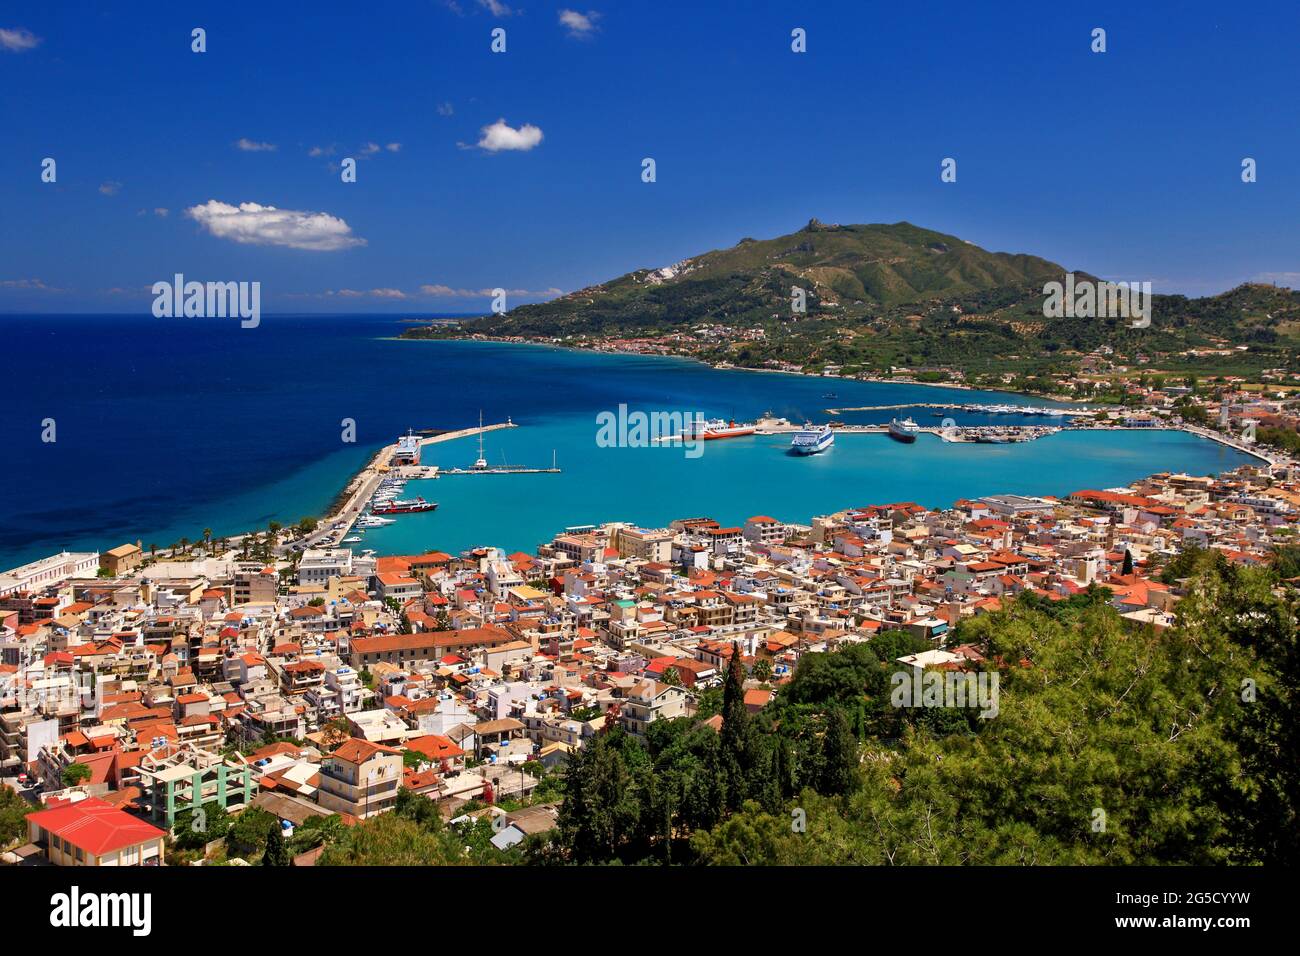 Zakynthos town, panoramic view of the capital of Zakynthos (or Zante), a beautiful island in Ionian Sea, Greece, and a popular touristic destination Stock Photo